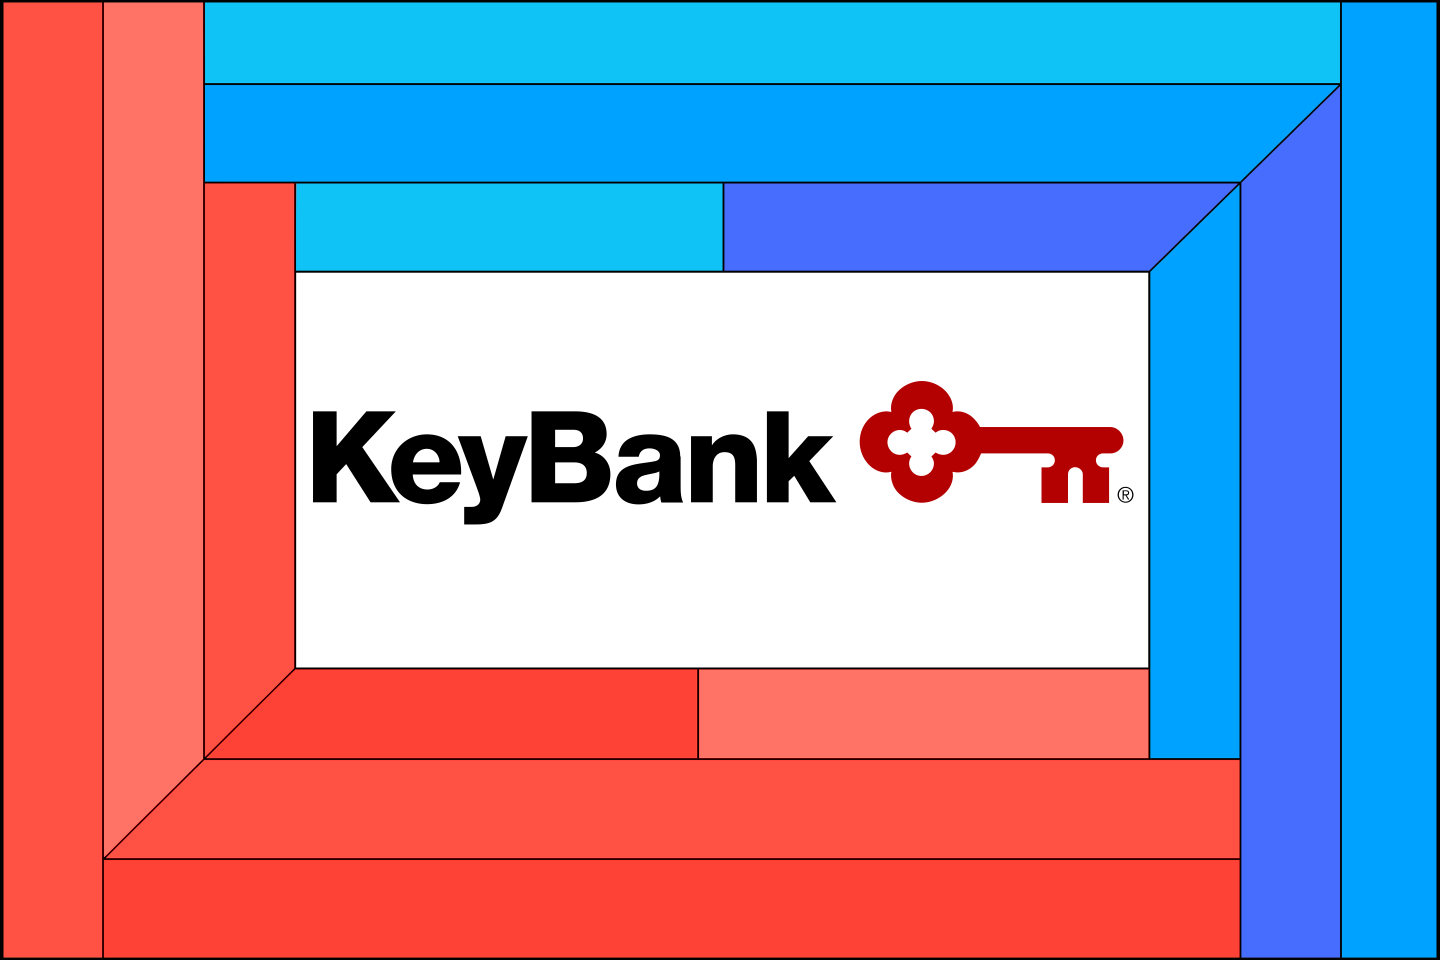 The KeyBank logo on a red and blue graphic background.